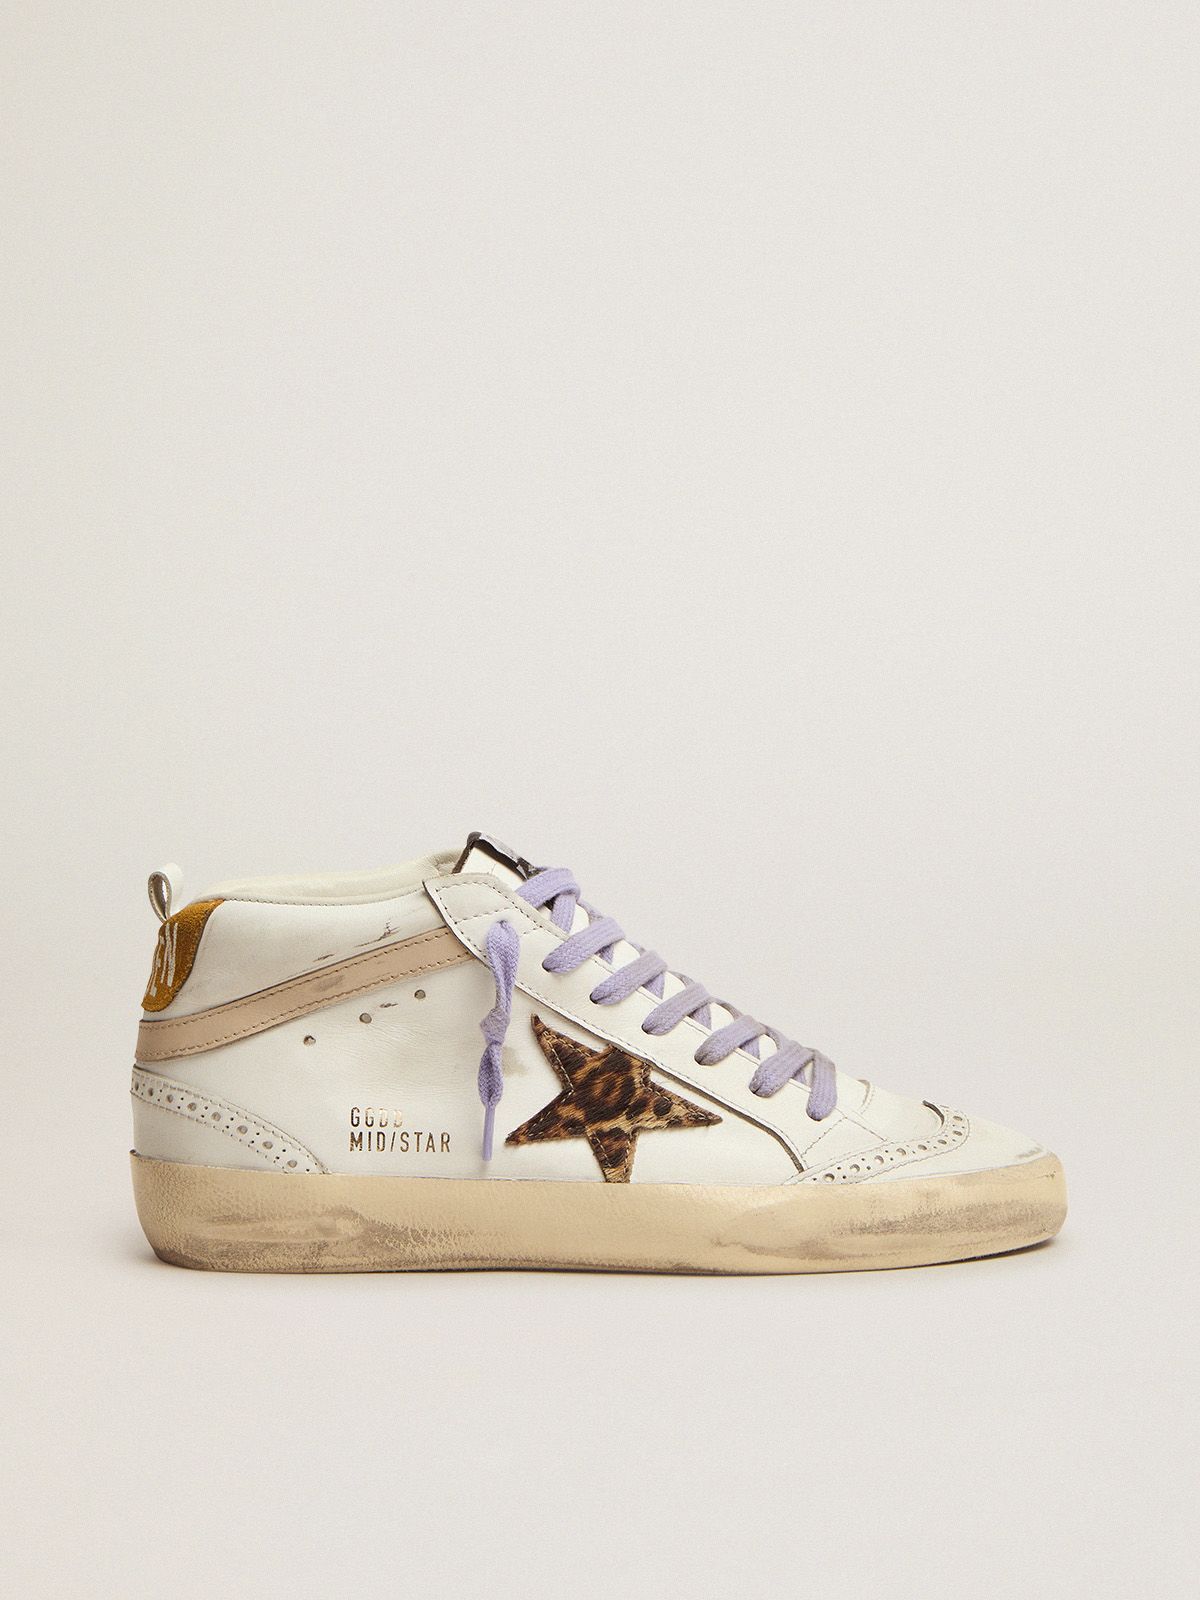 golden goose with light sneakers suede star and tab Mid leopard-print heel orange Star pony skin